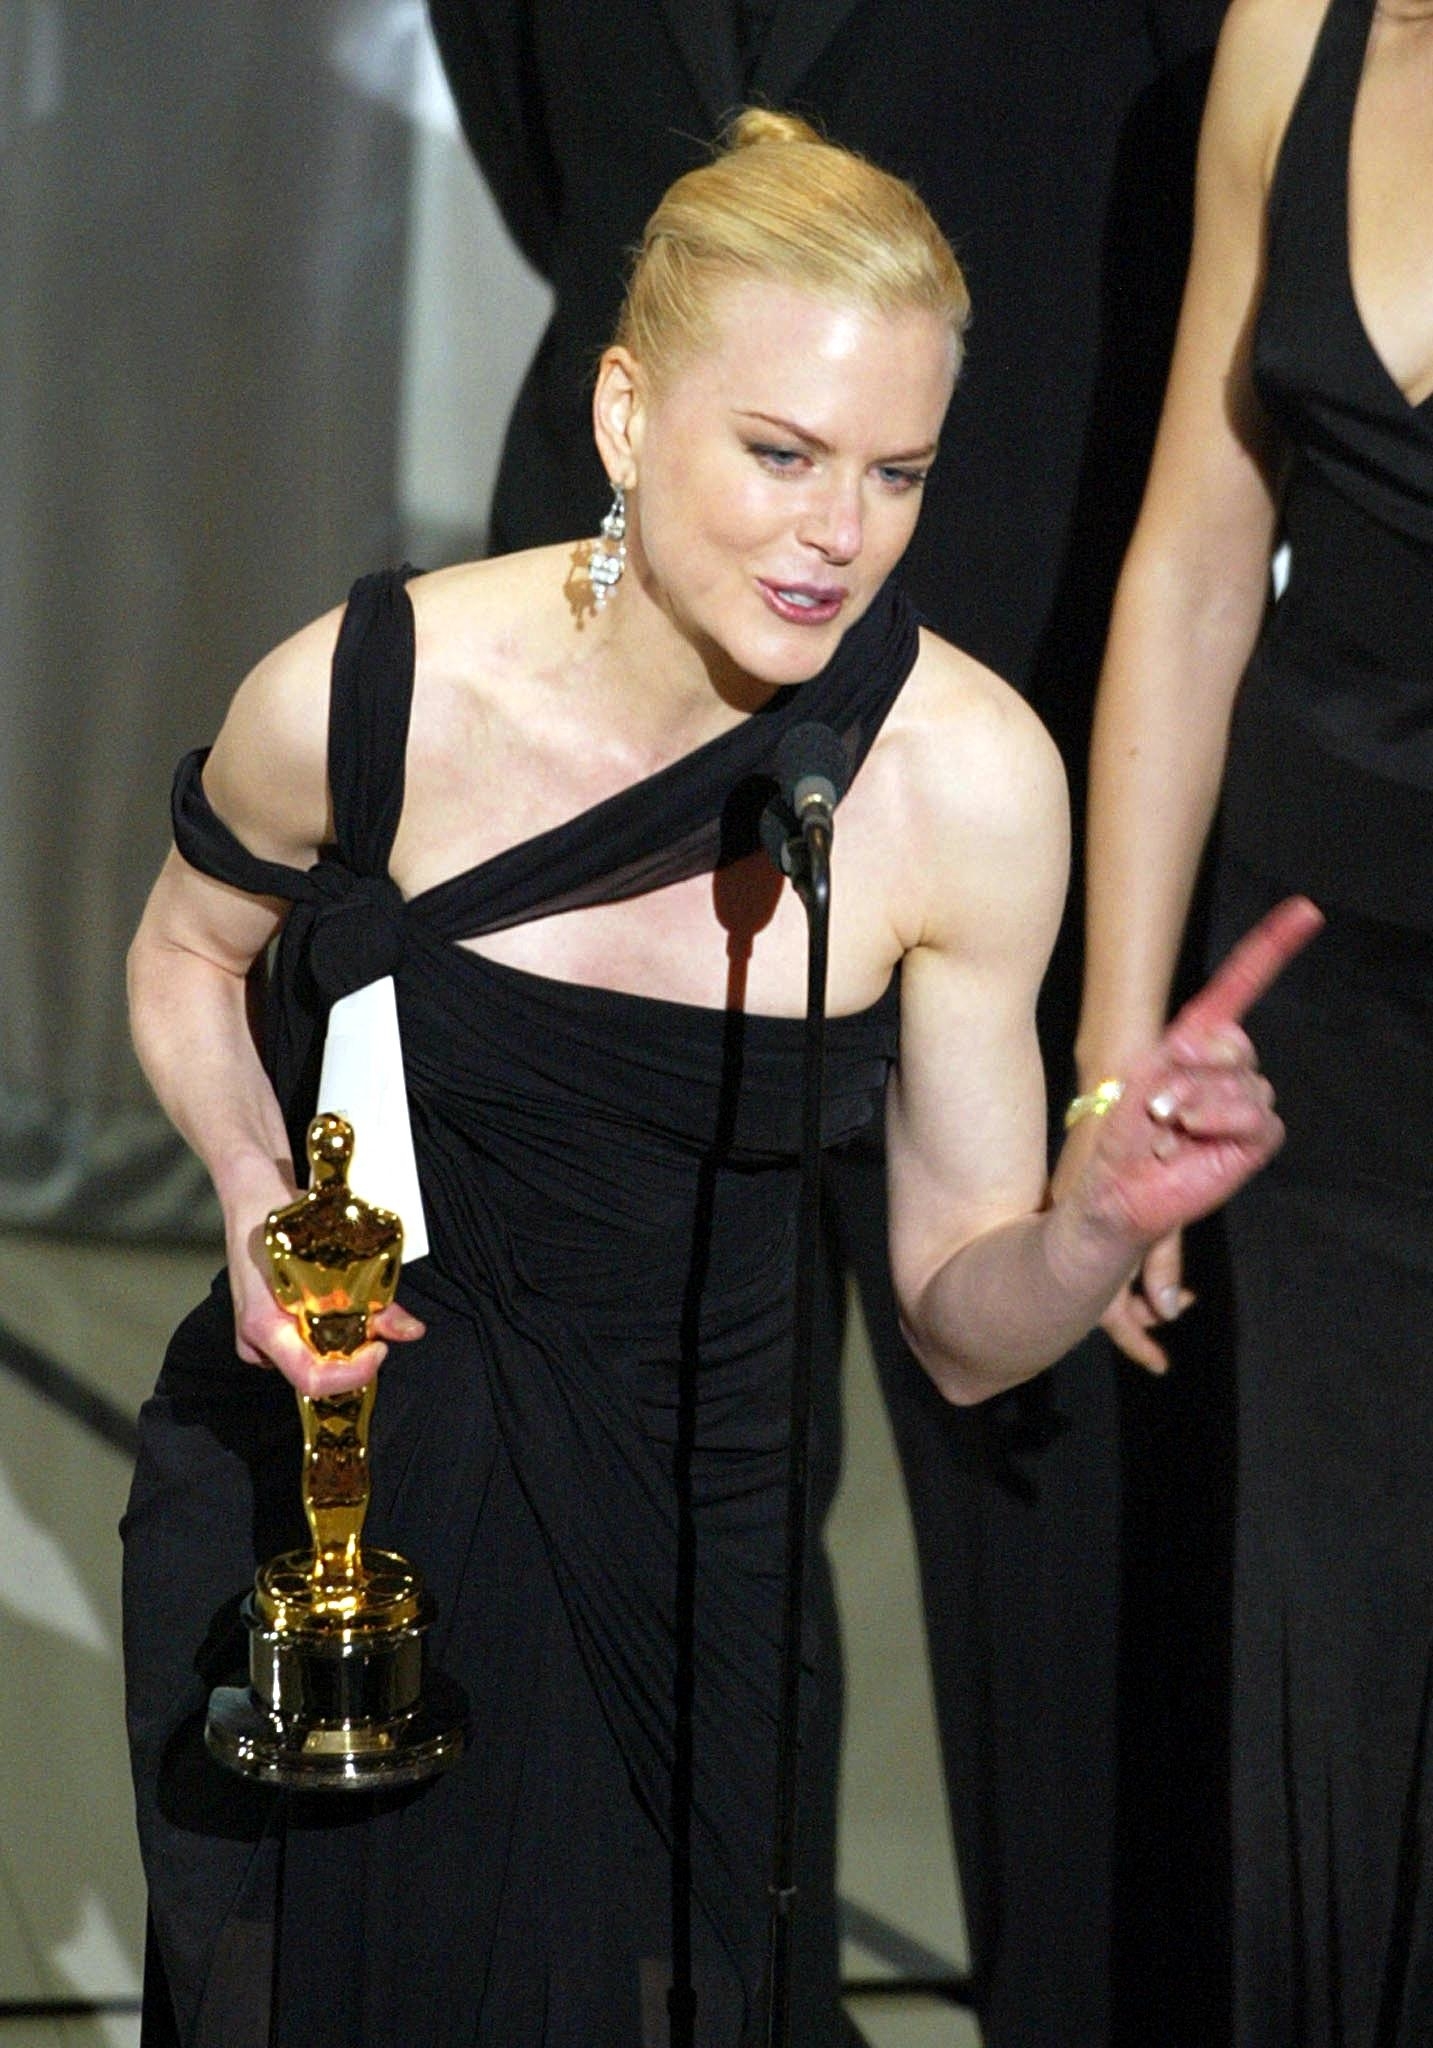 nicole holding her award while giving her speech on stage